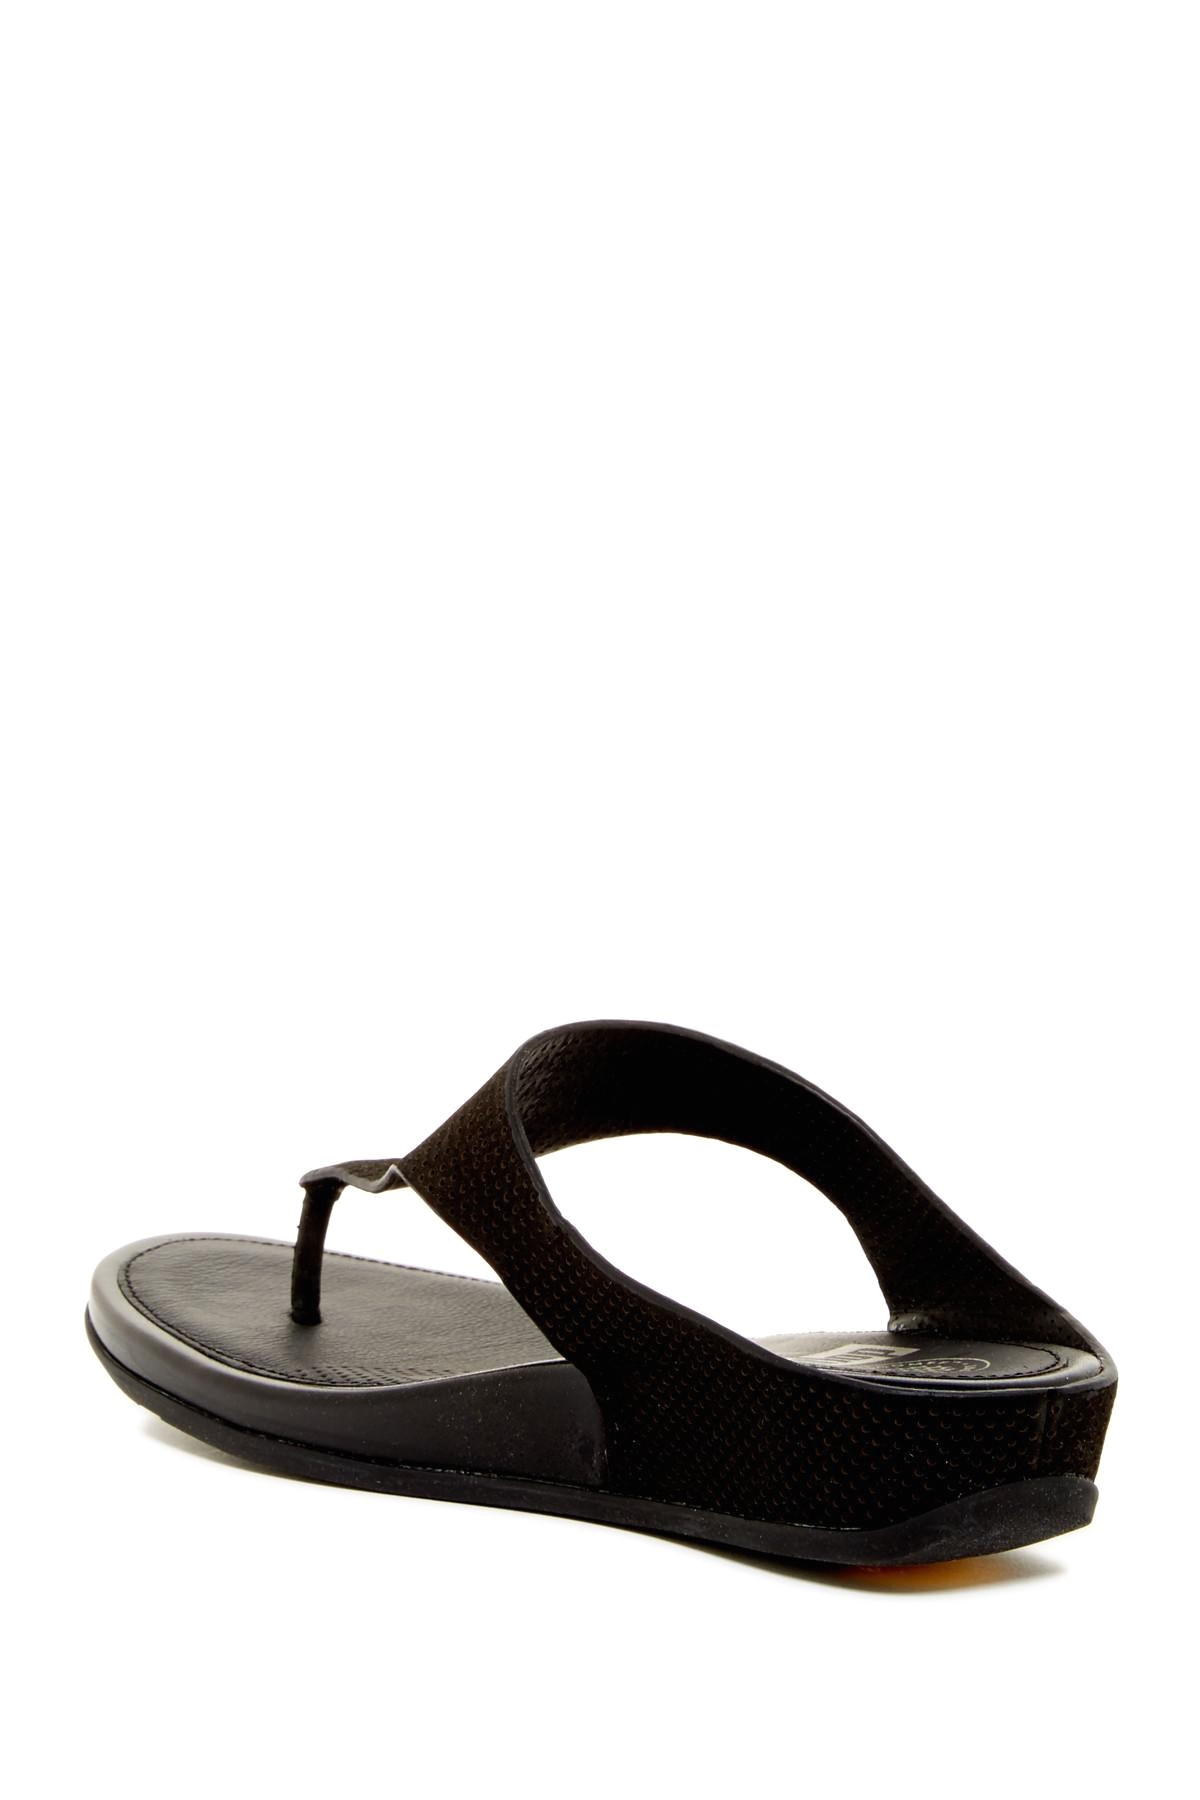 nordstrom rack fitflop awesome lyst fitflop banda super ff cushioned perforated sandal in black of elegant